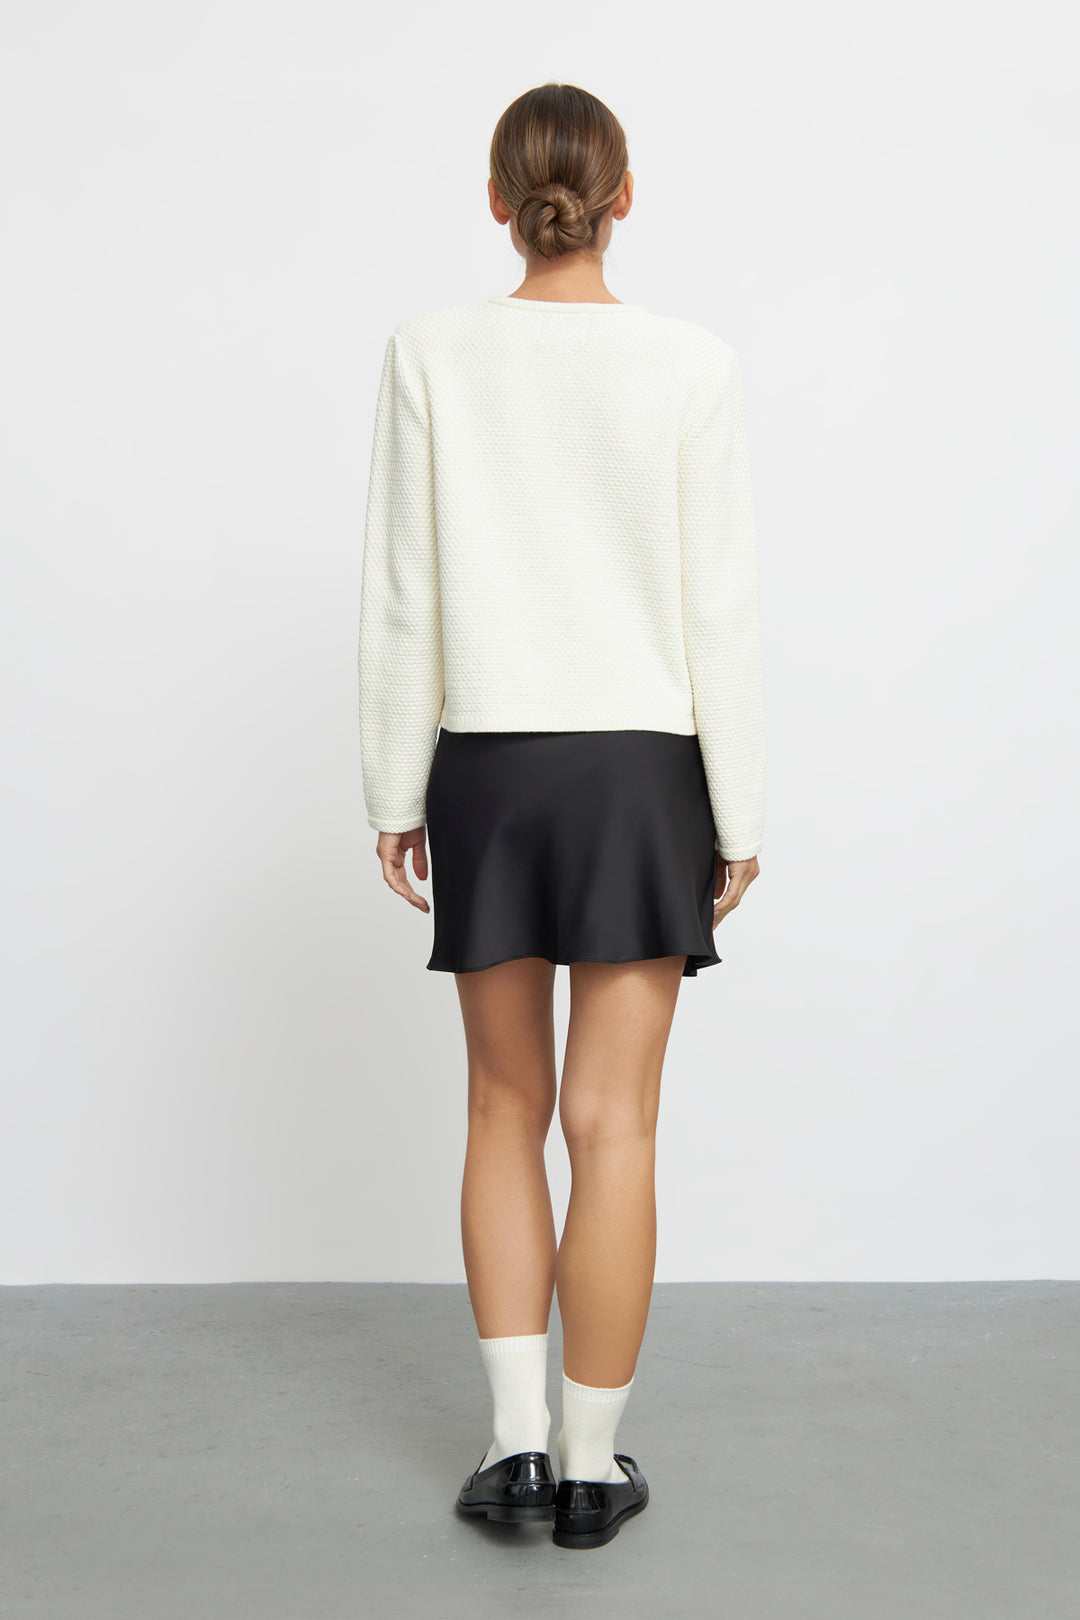 Sienna Cardigan - Knitted off-white